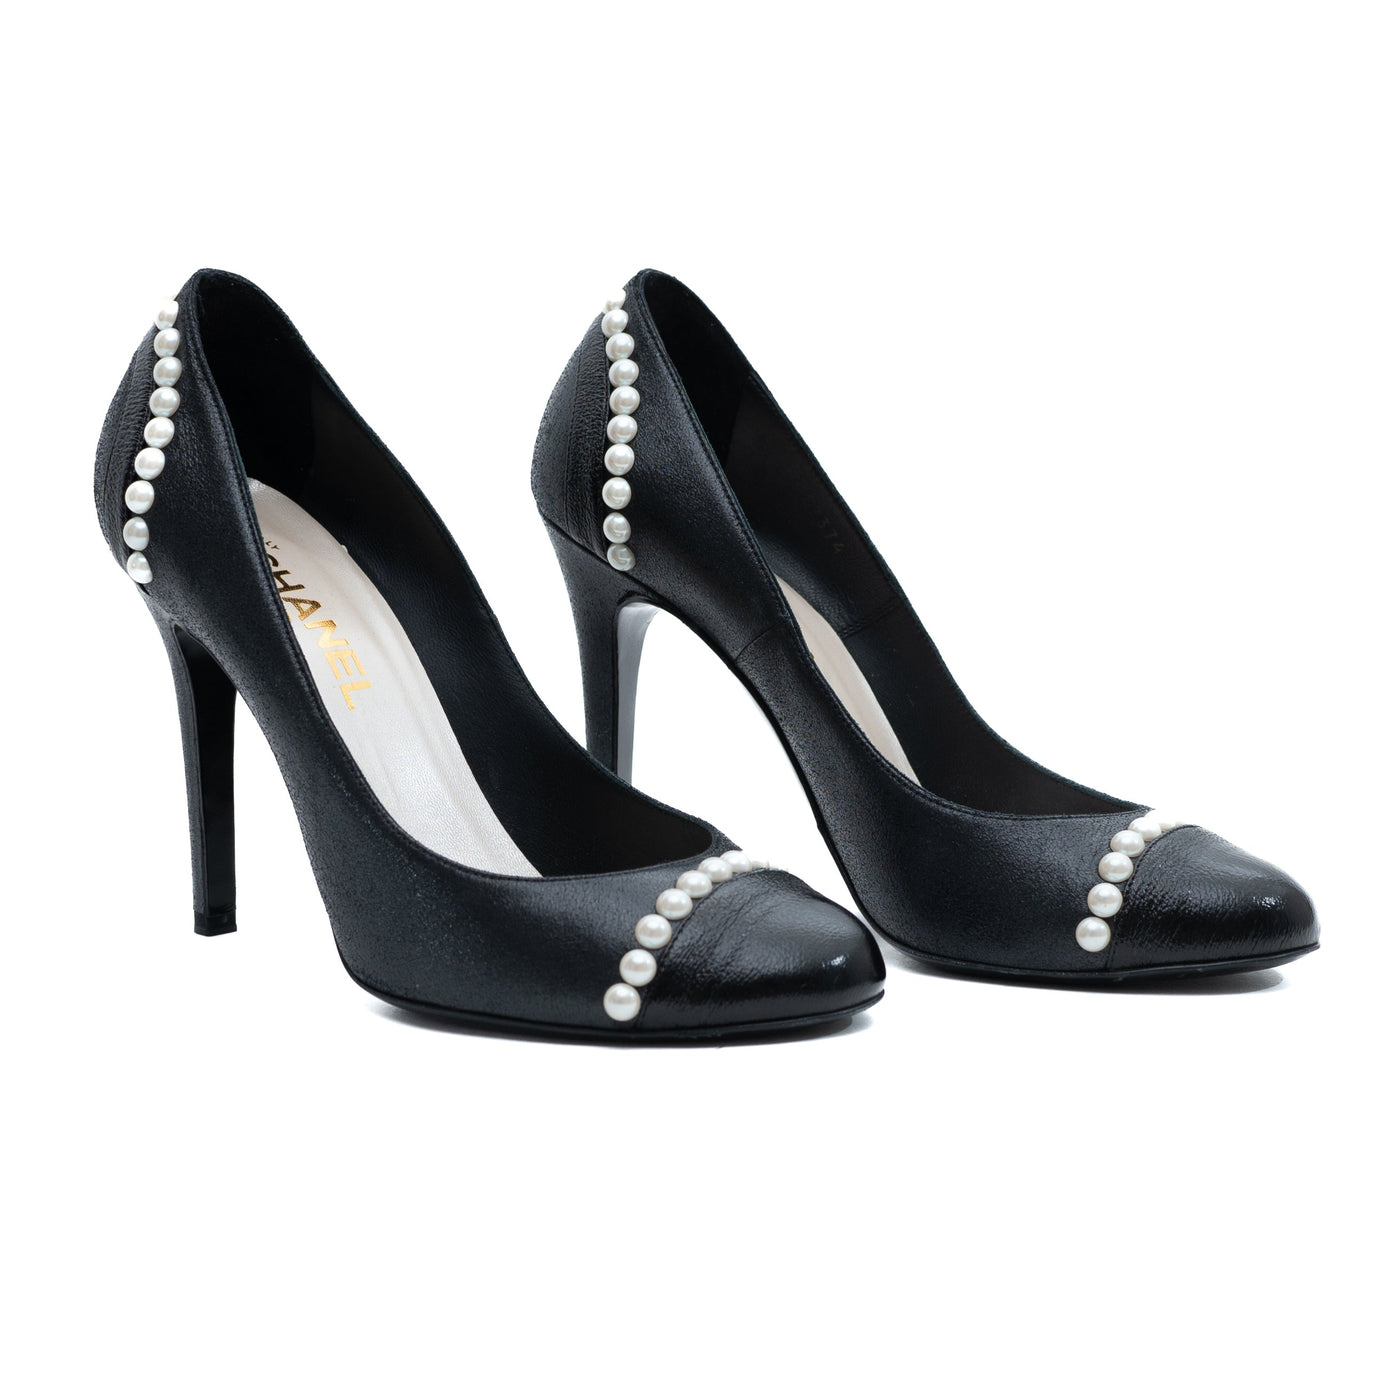 Chanel black leather pump embellished with faux pearl pre-owned